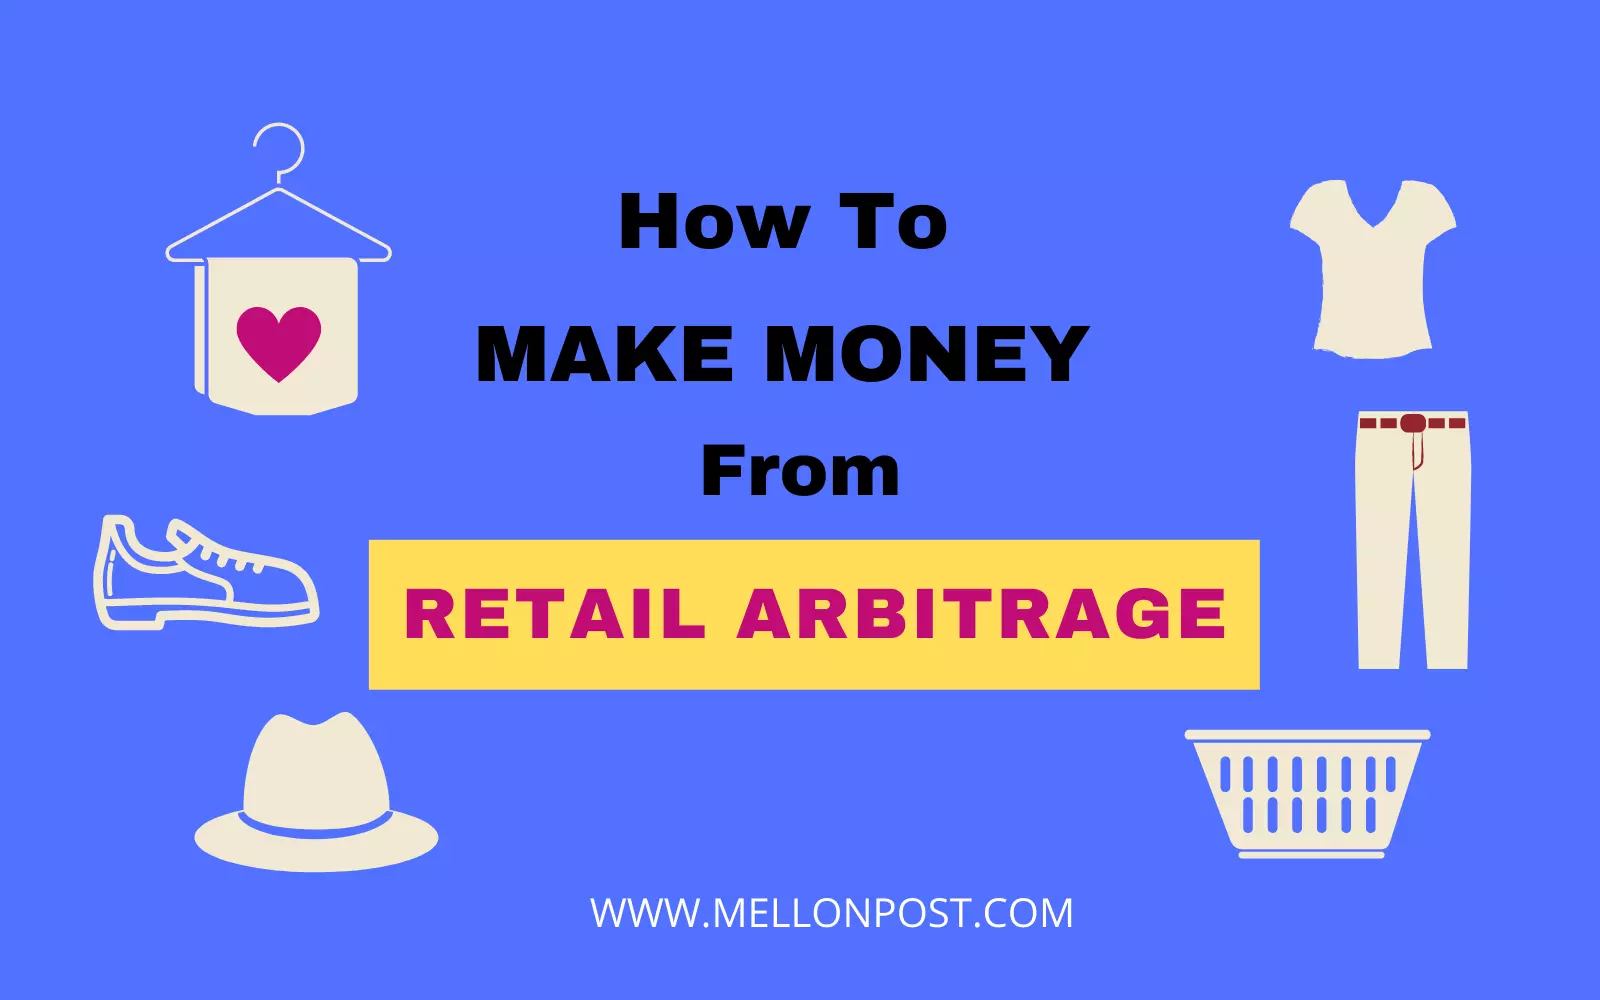 How To Make Money From Retail Arbitrage